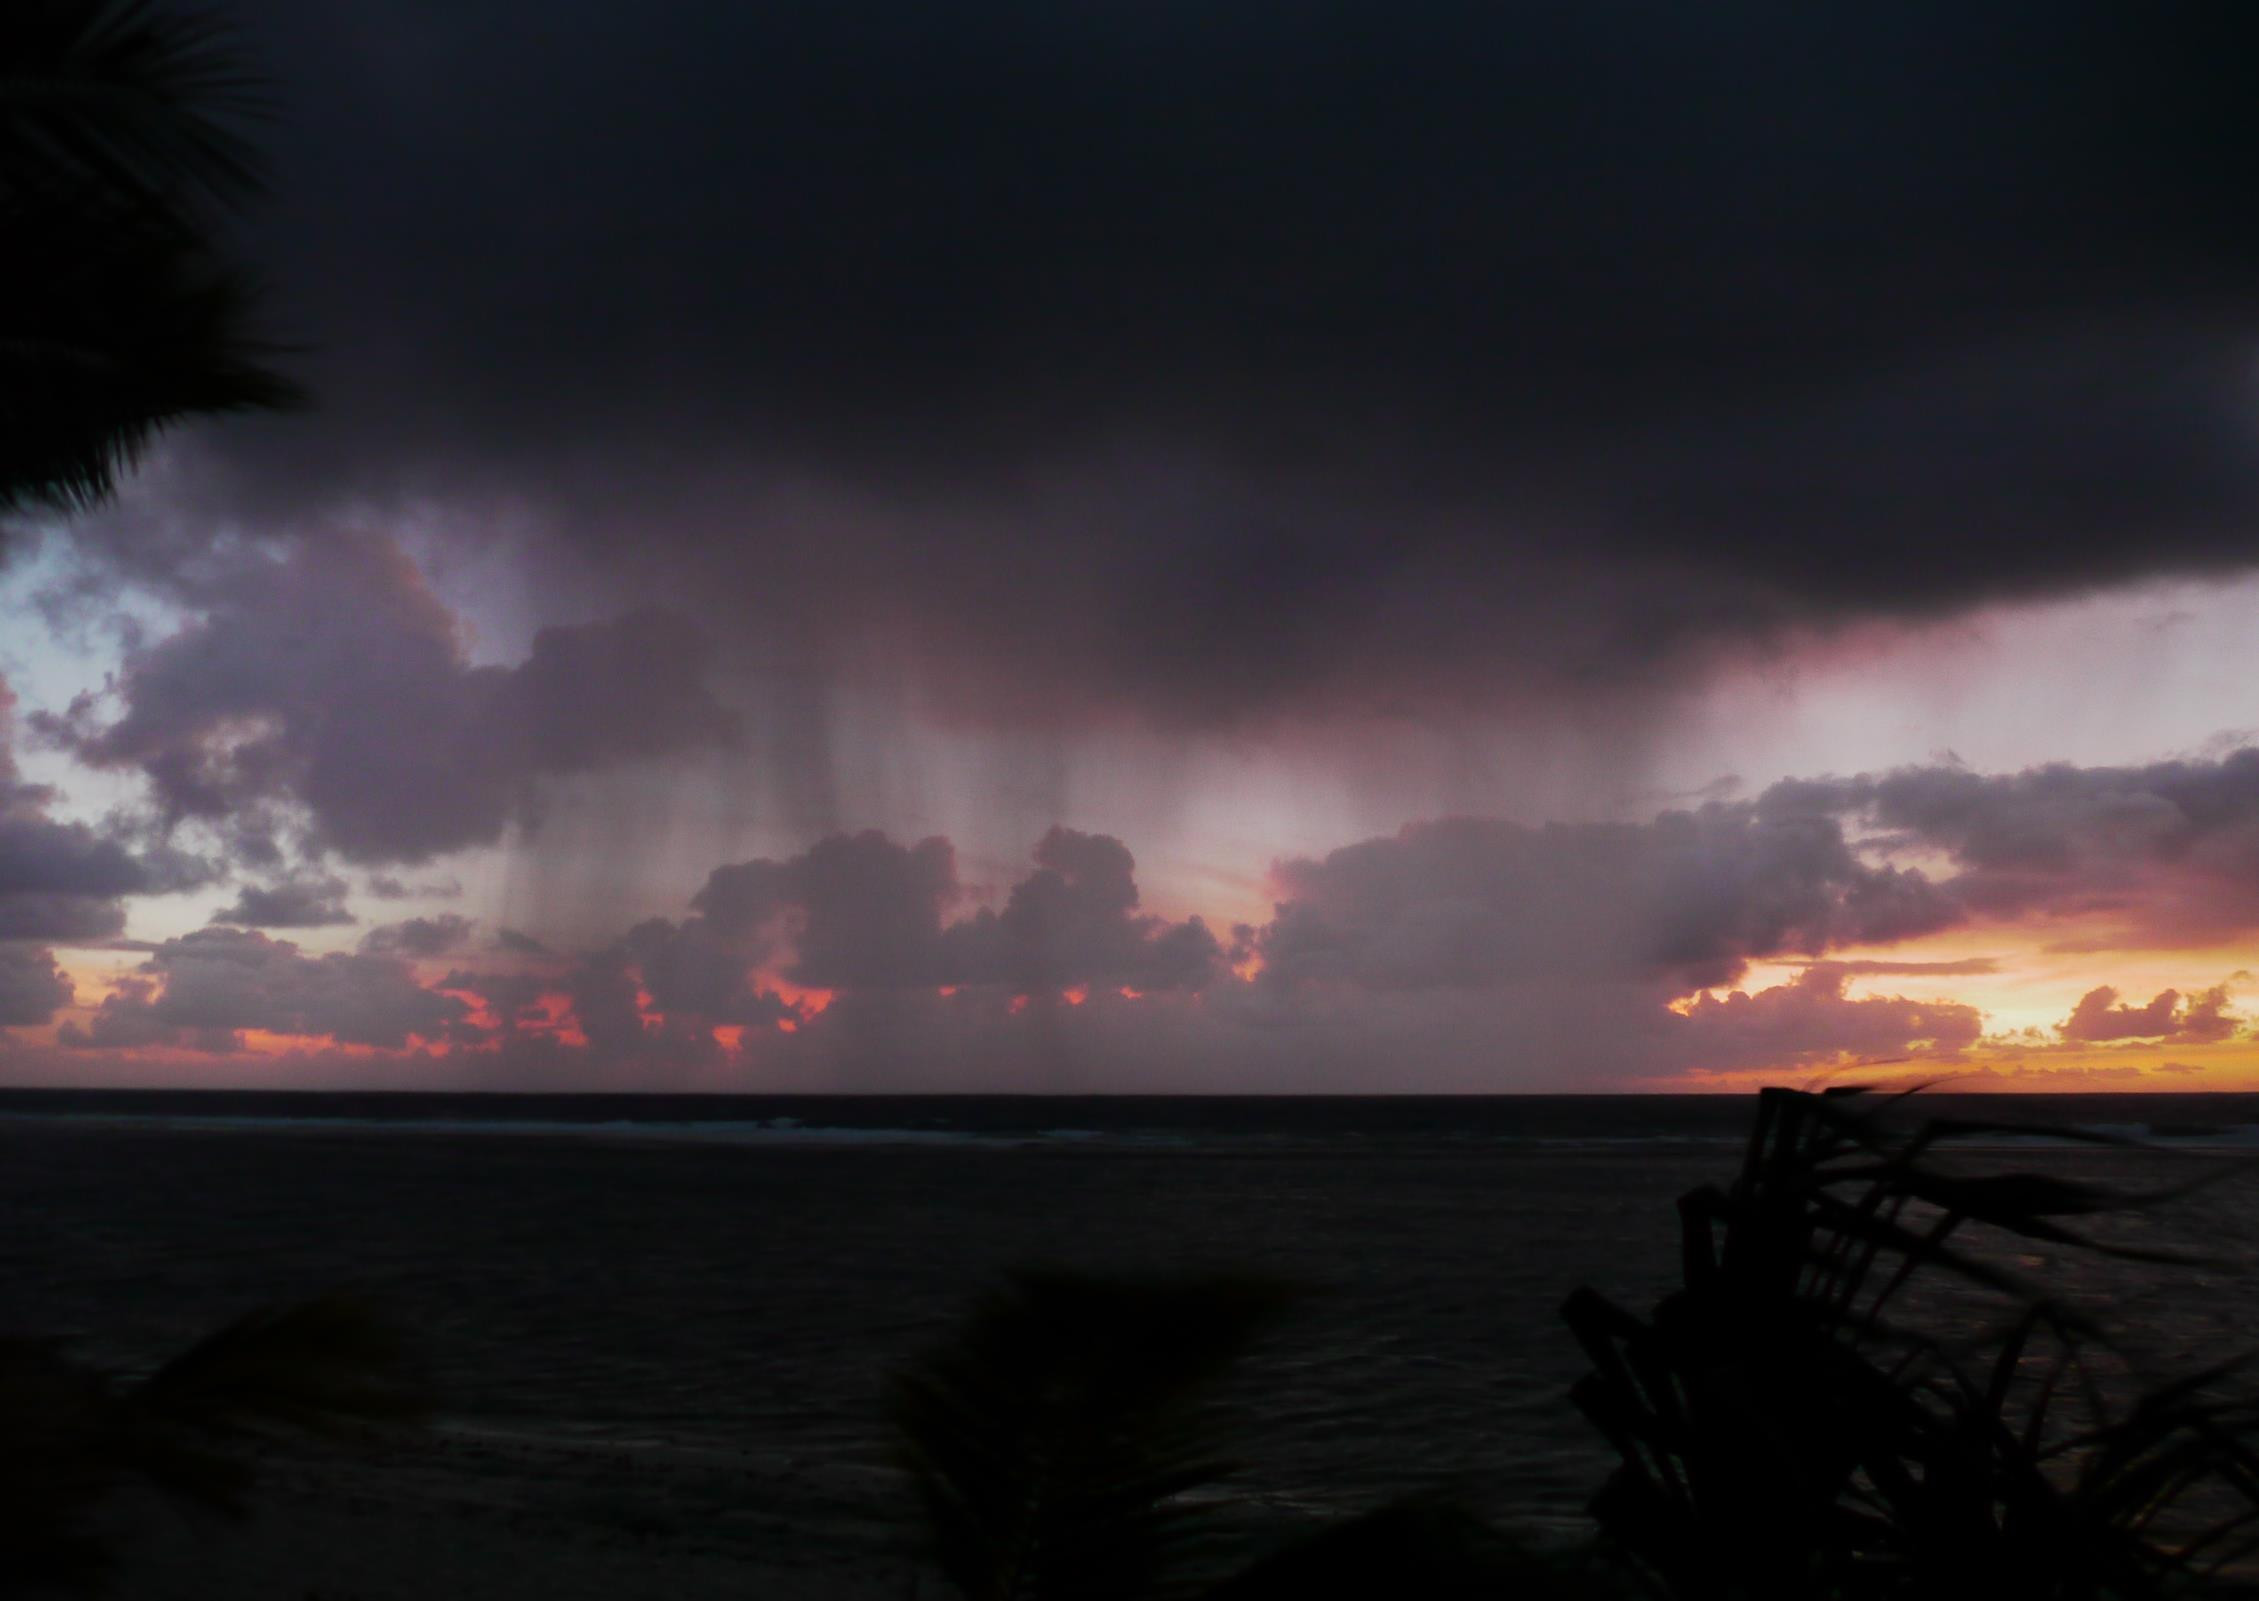 A curtain of rain falls on our final sunset in Tonga